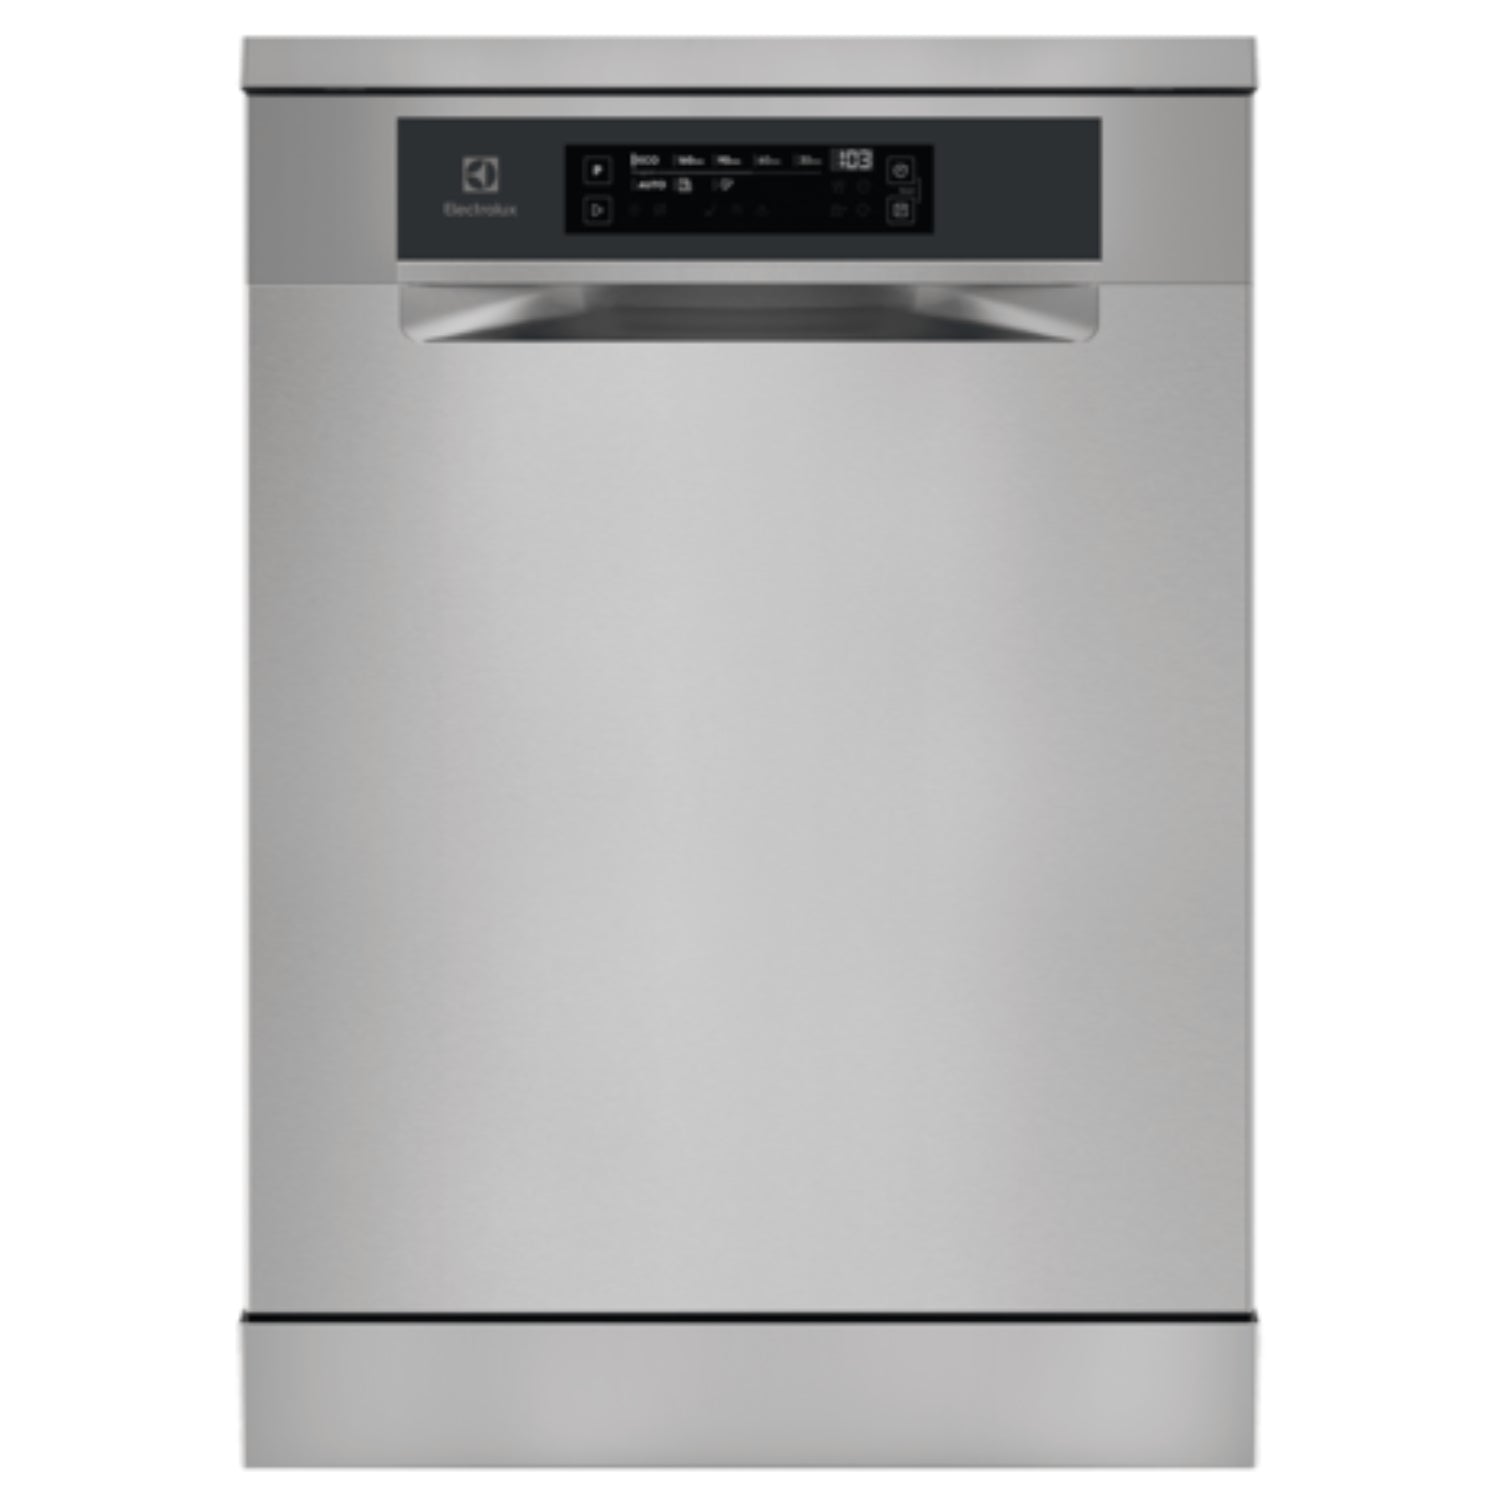 Electrolux 60cm Freestanding Dishwasher with 15 Place Settings, Adaptable Drawer Space, High Pressure Water Jets, Stainless Steel